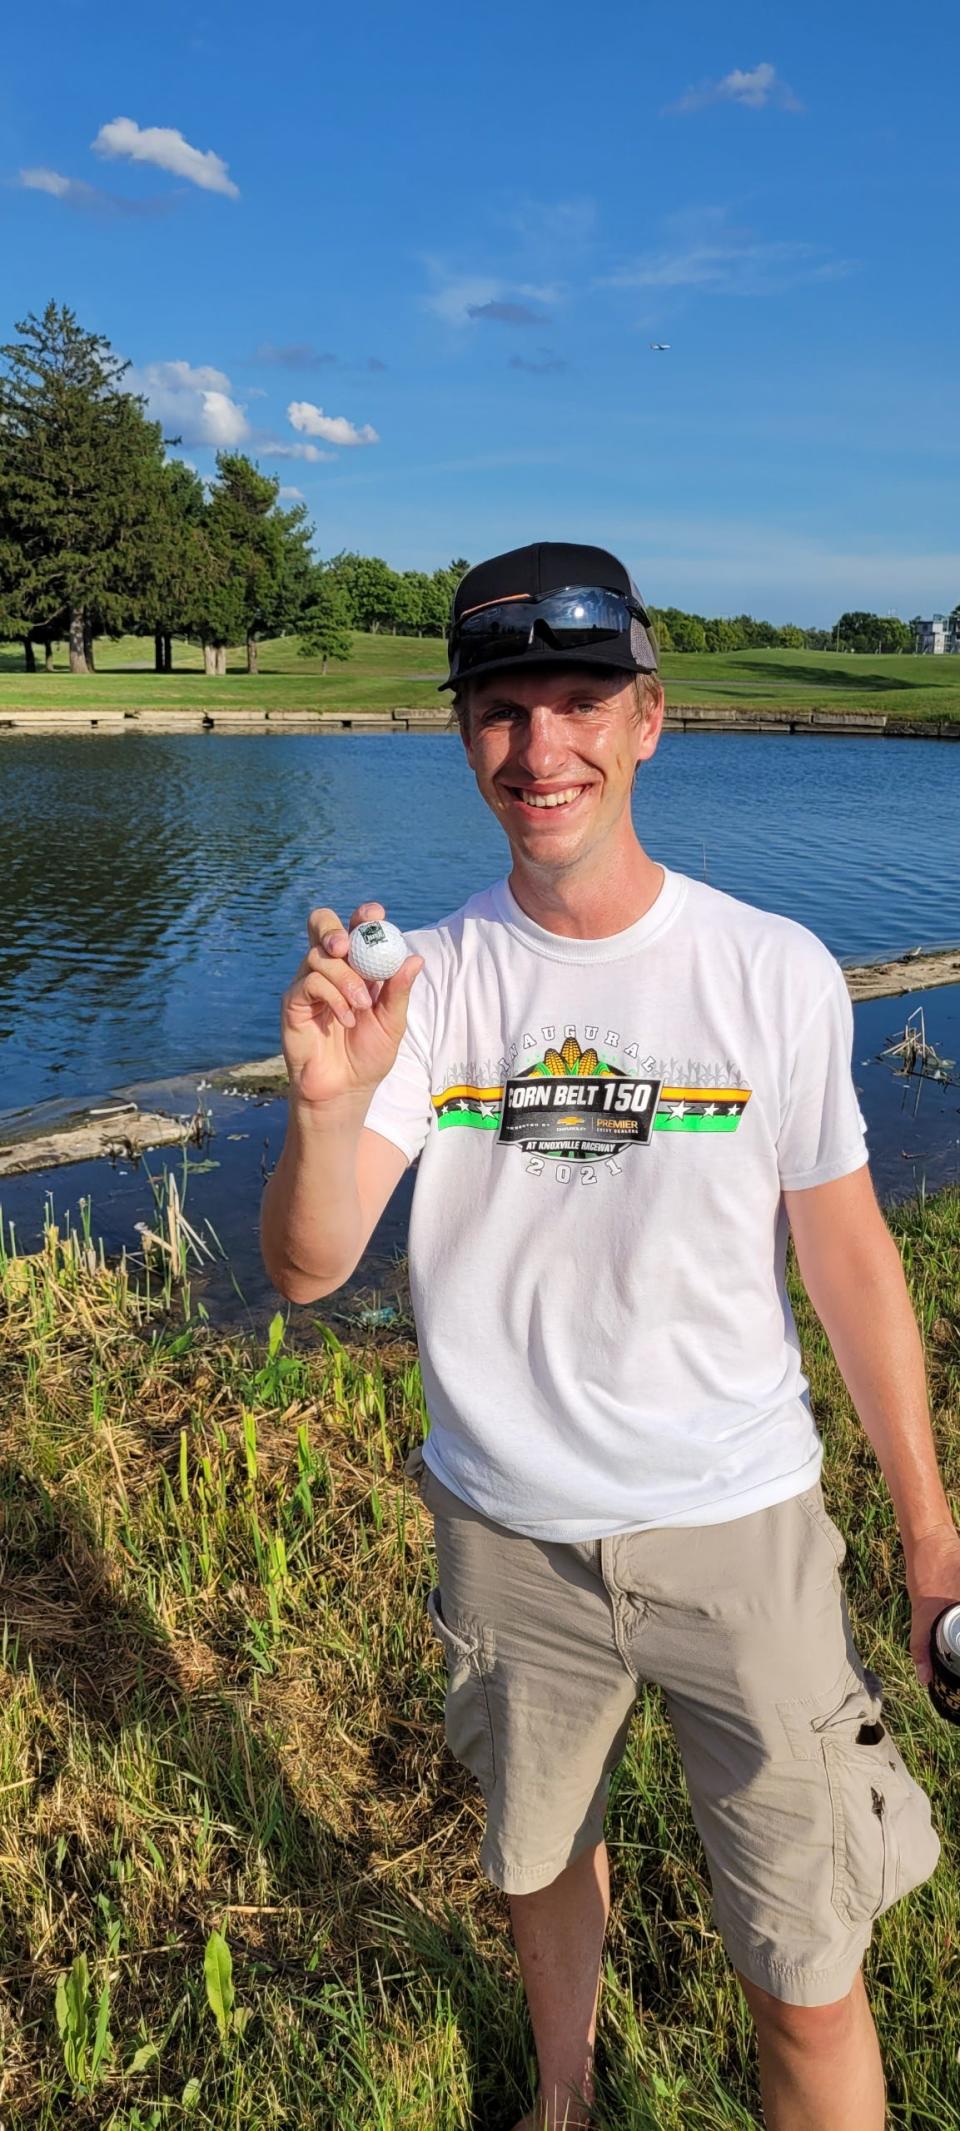 The infield of the Indianapolis Motor Speedway has four holes of a golf course designed by legendary golf course architect Pete Dye. Jason Strickland and I found golf balls in a water hazard during a trip to the speedway on Fri. Aug. 13, 2021.